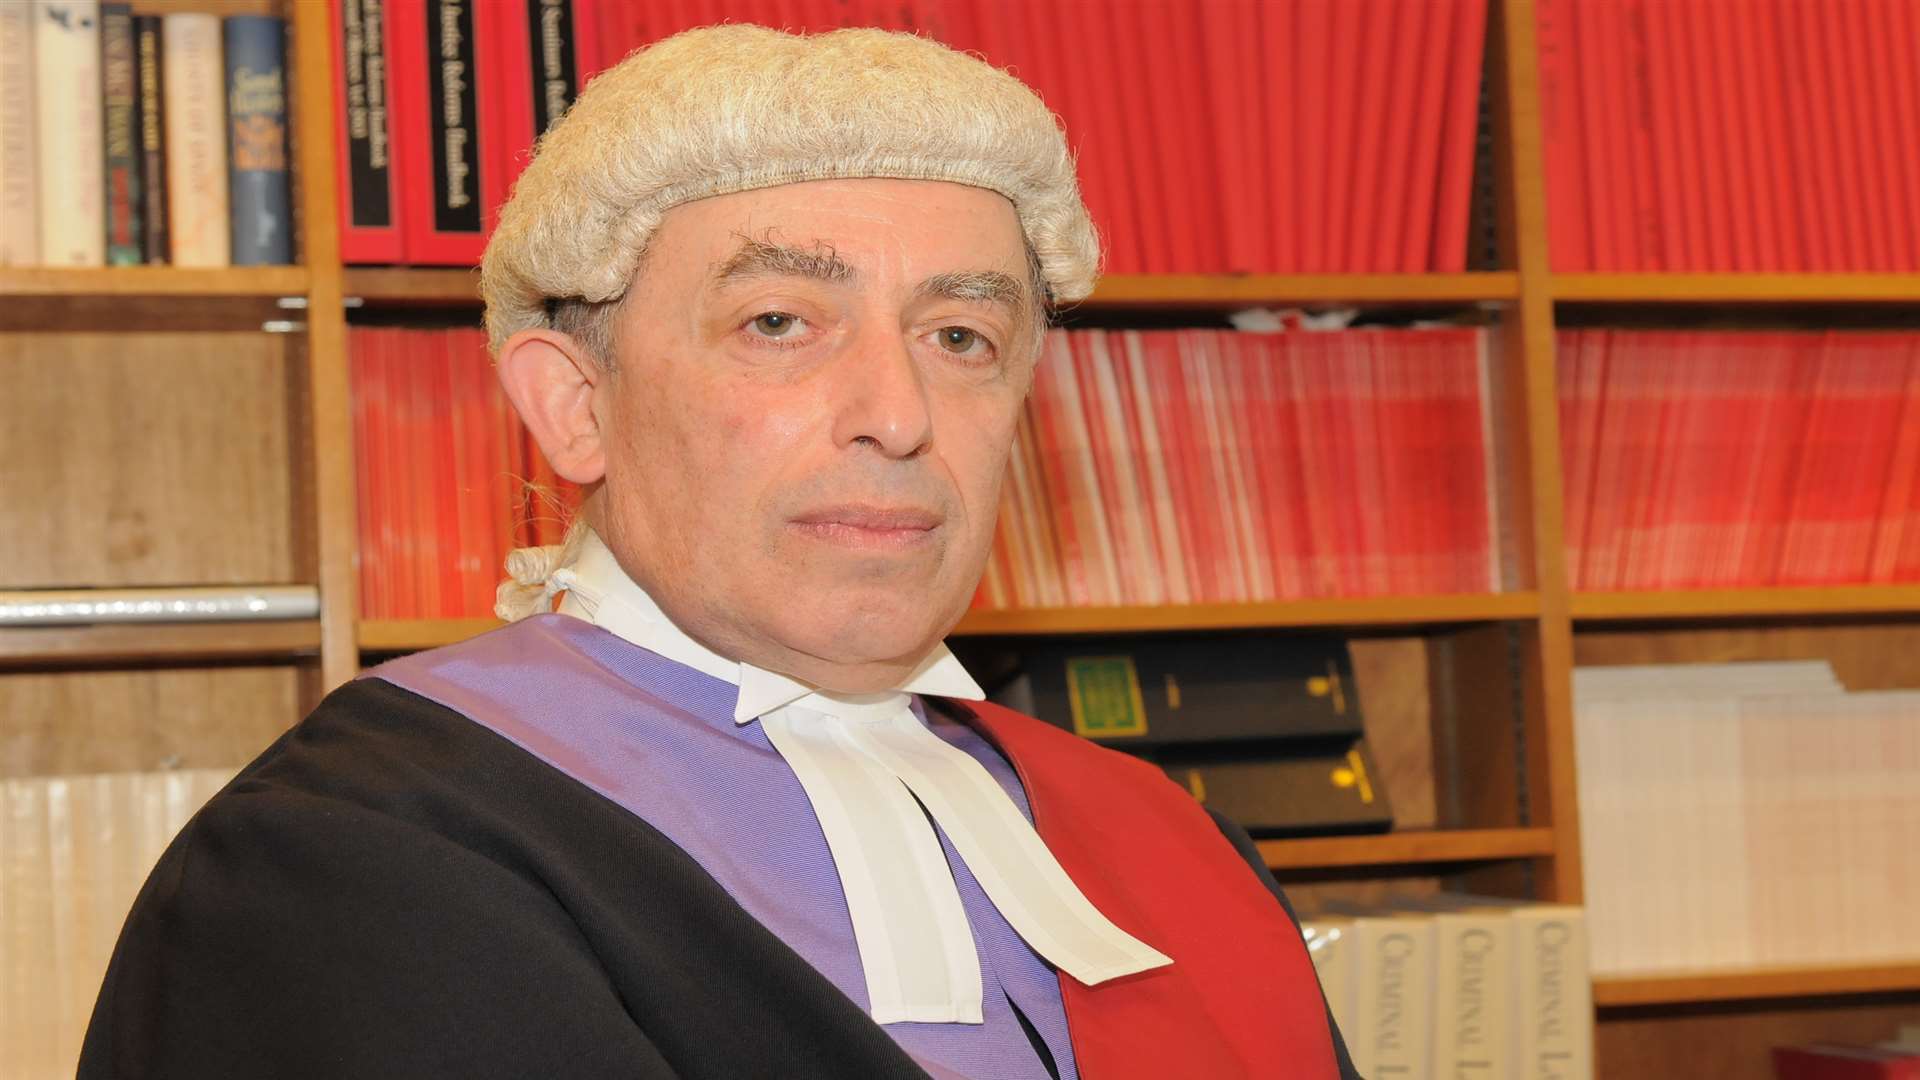 Judge Philip Statman presided over the case